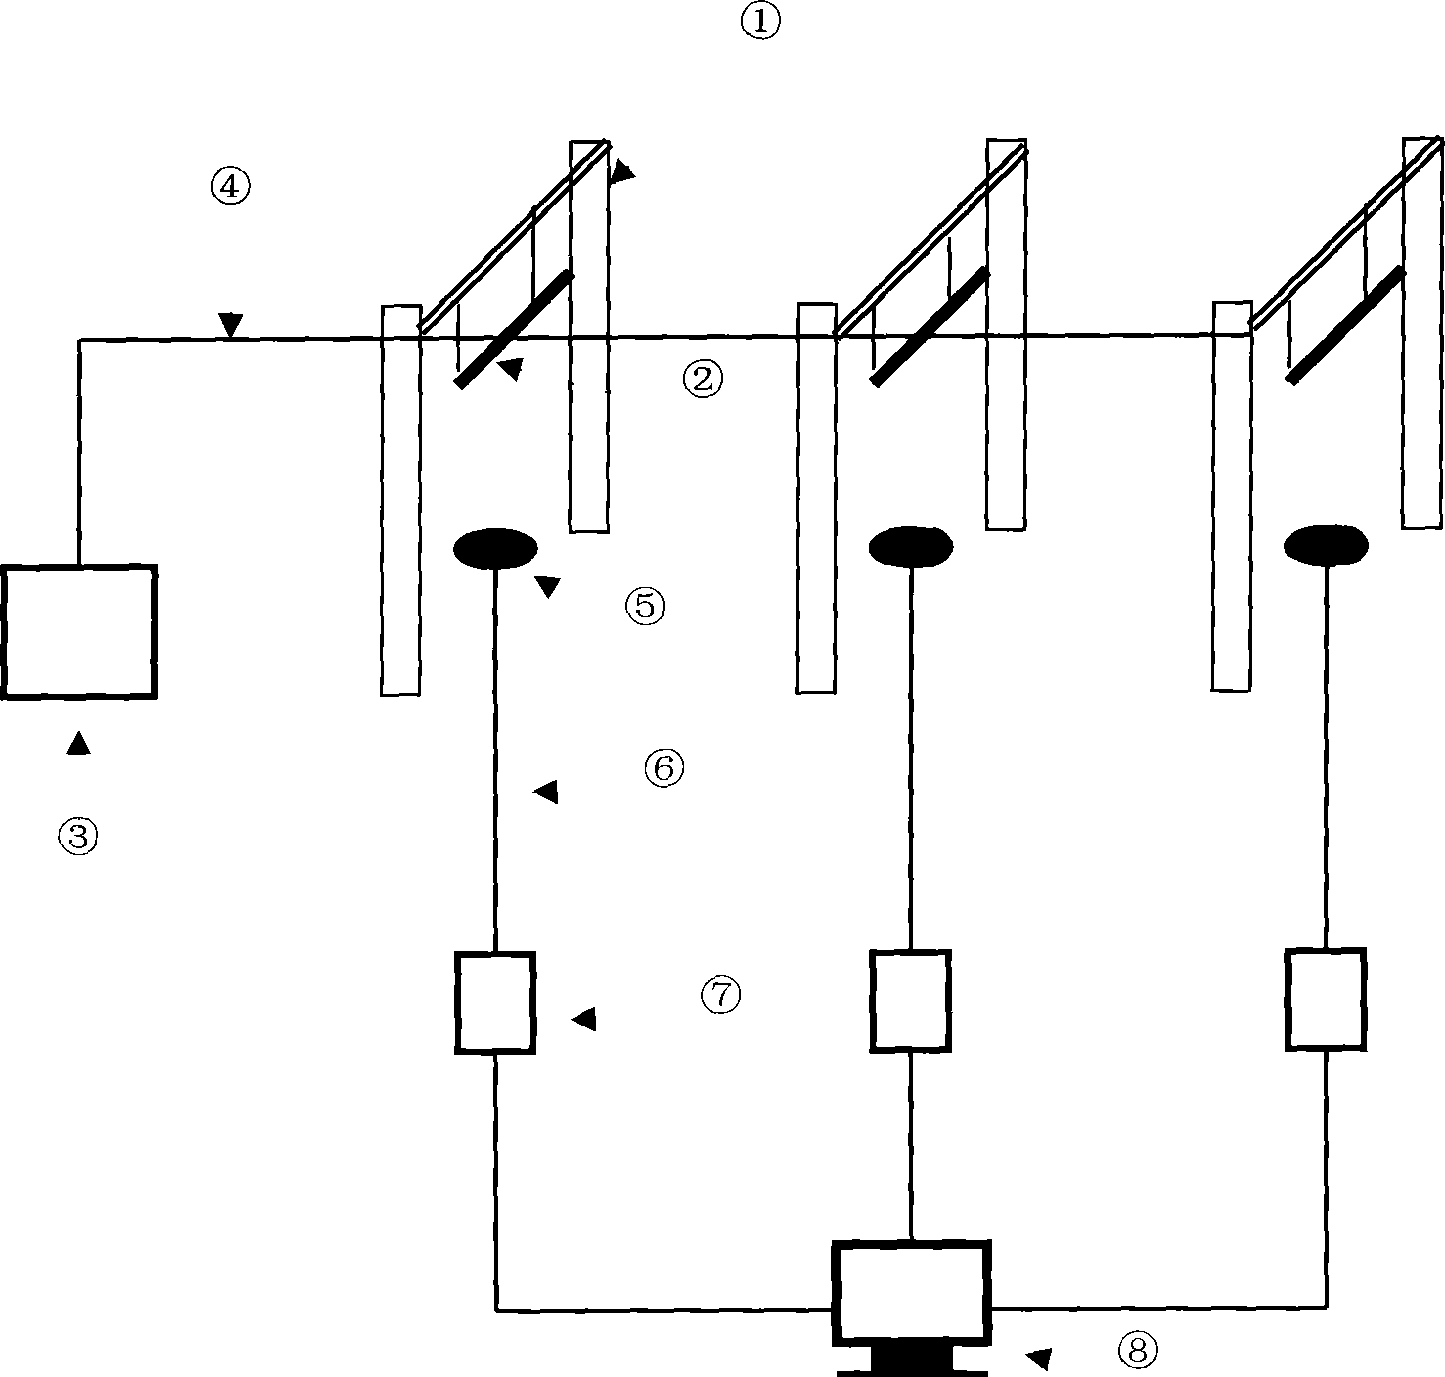 Apparatus for continuously measuring ultraviolet intensity in outdoor environment